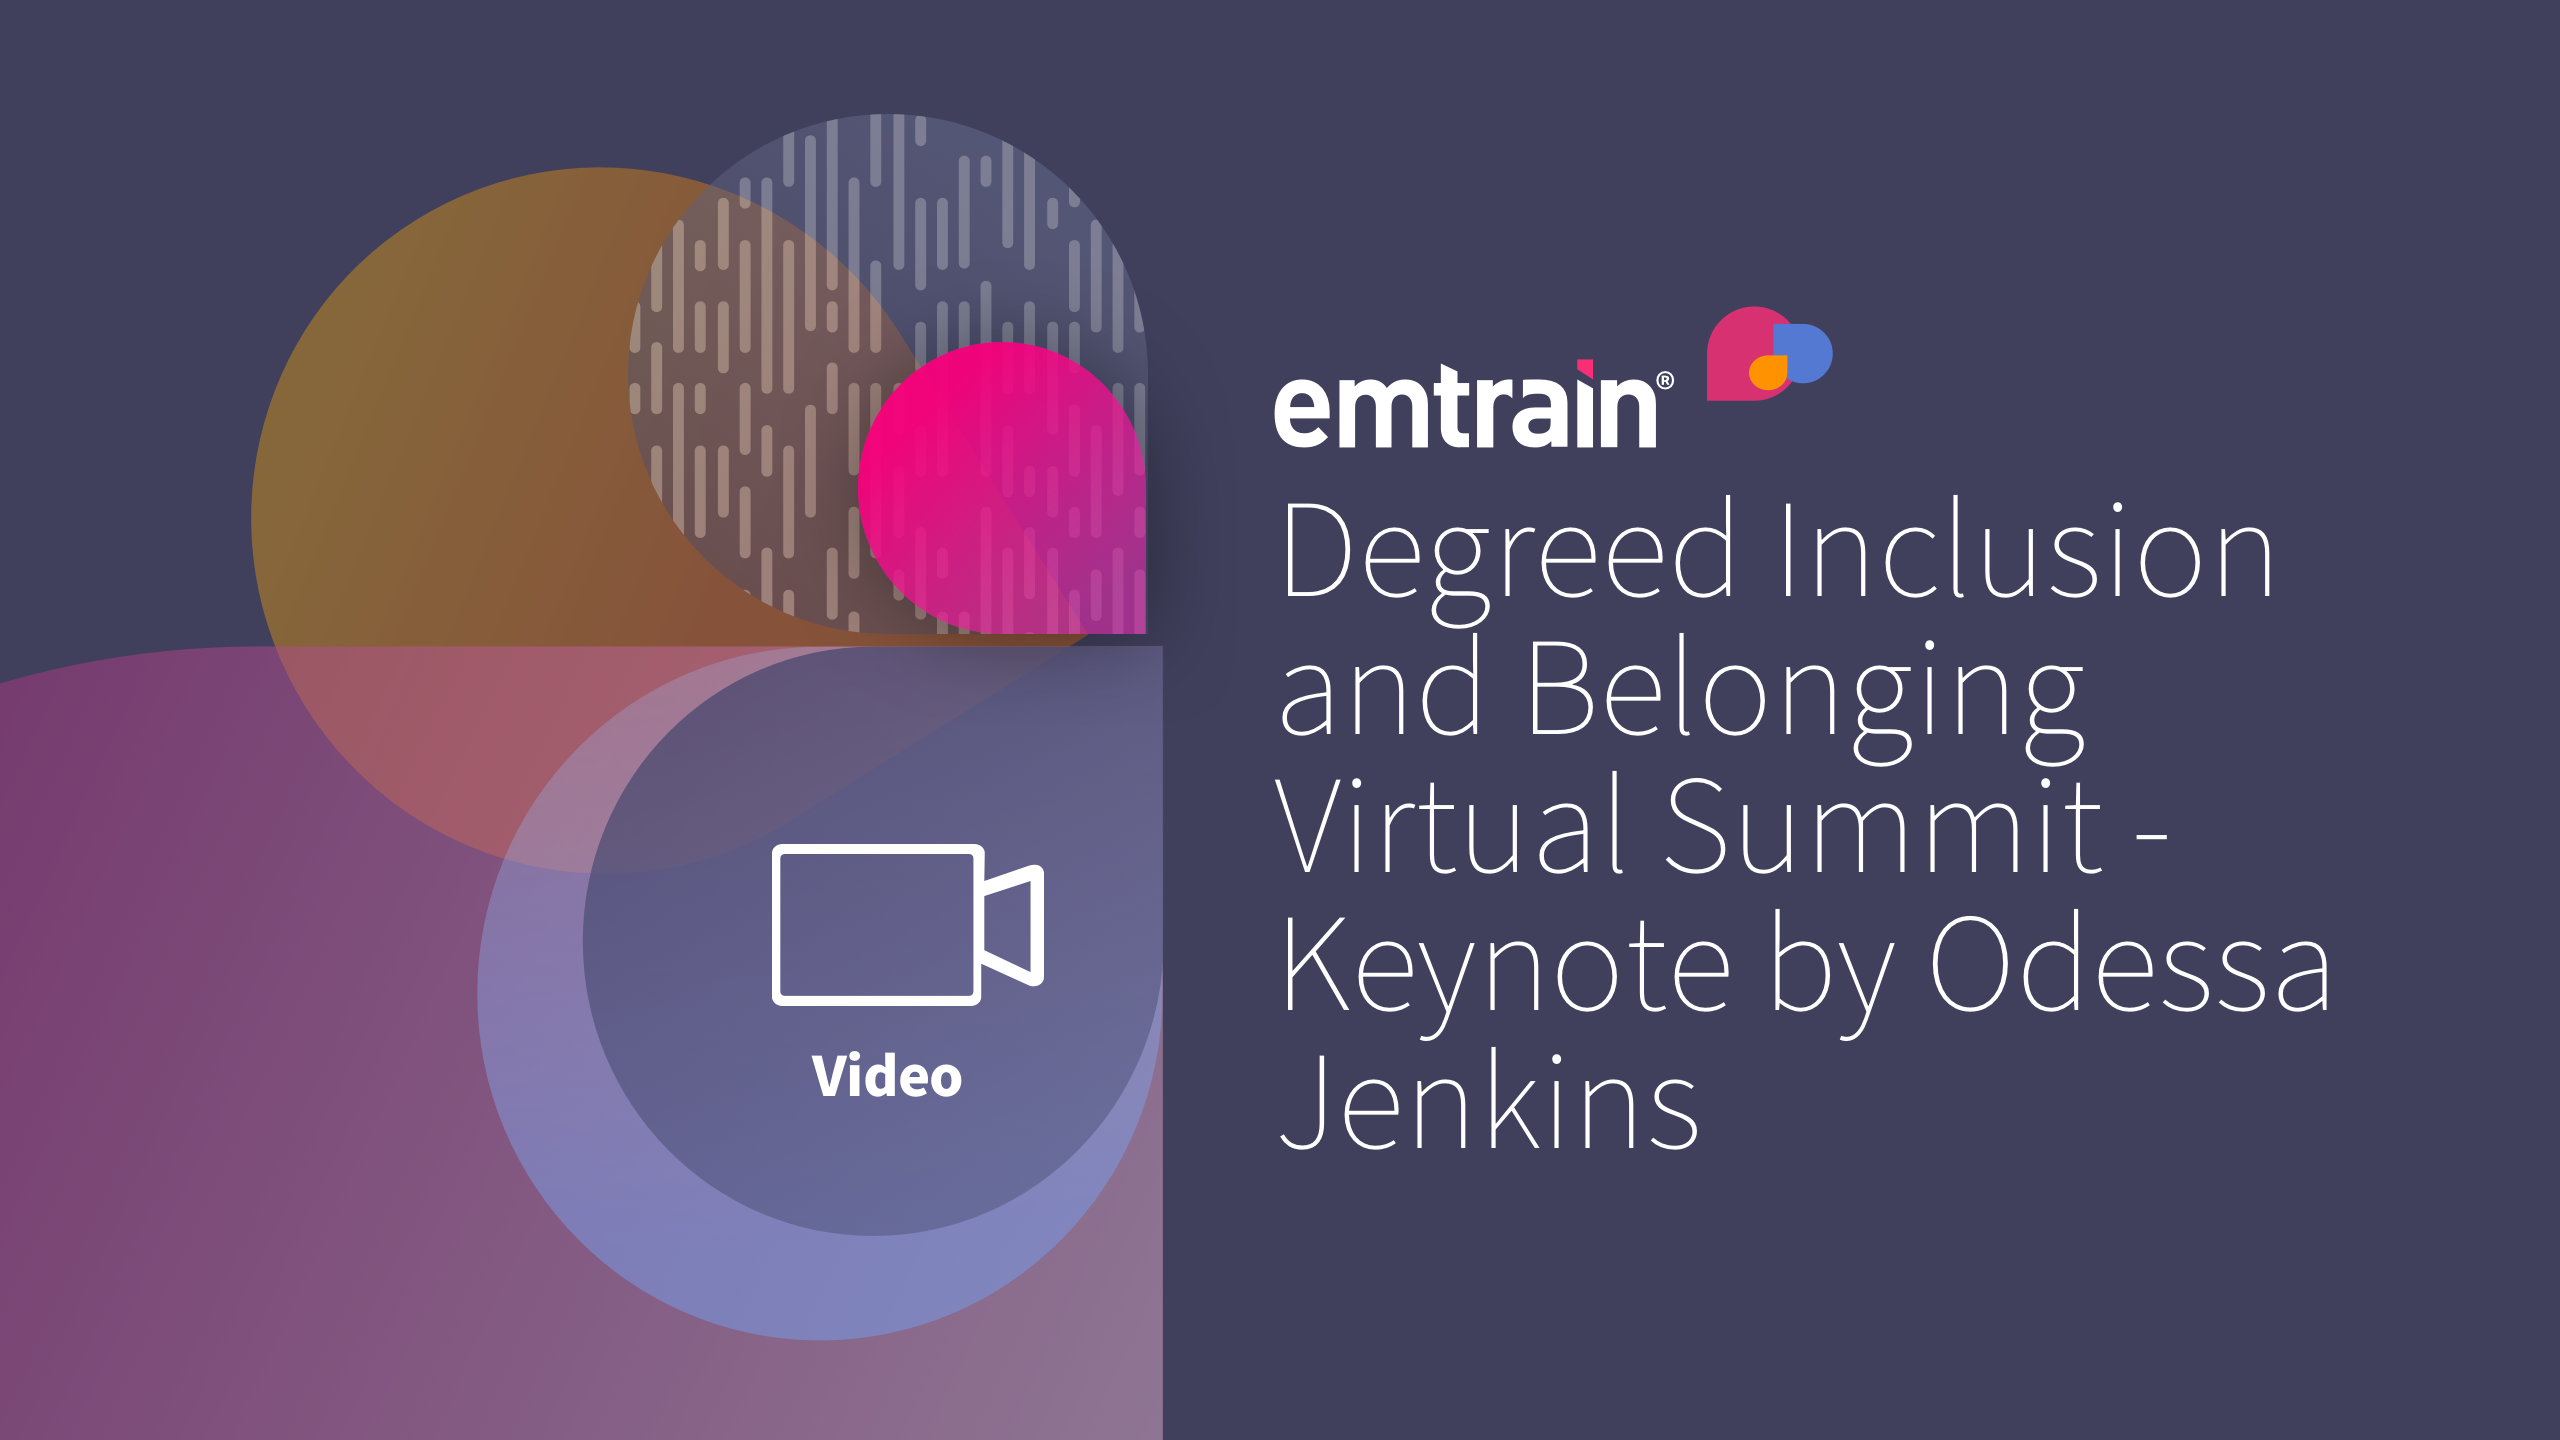 Degreed Inclusion and Belonging Virtual Summit - Keynote by Odessa Jenkins